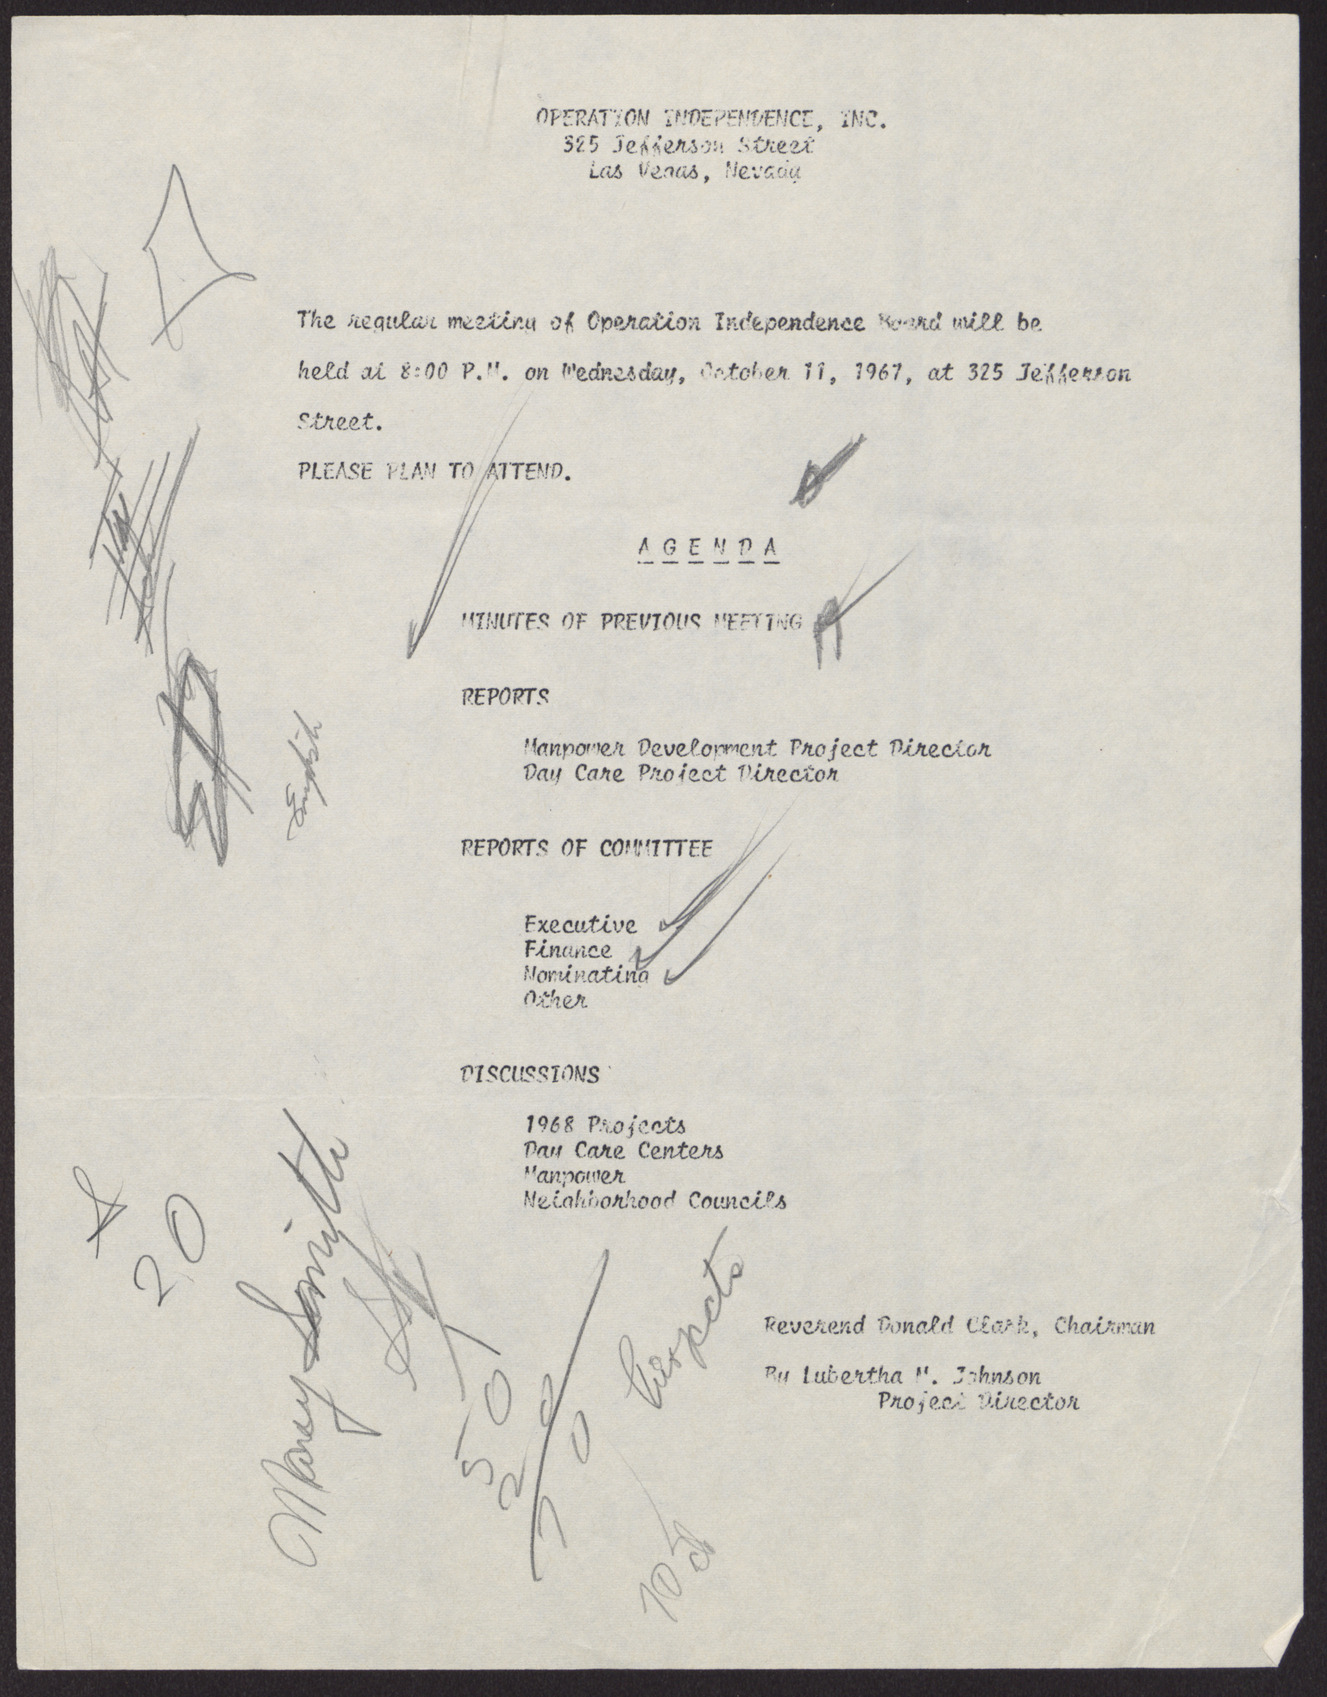 Agenda from Operation Independence Executive Committee Meeting, October 11, 1967